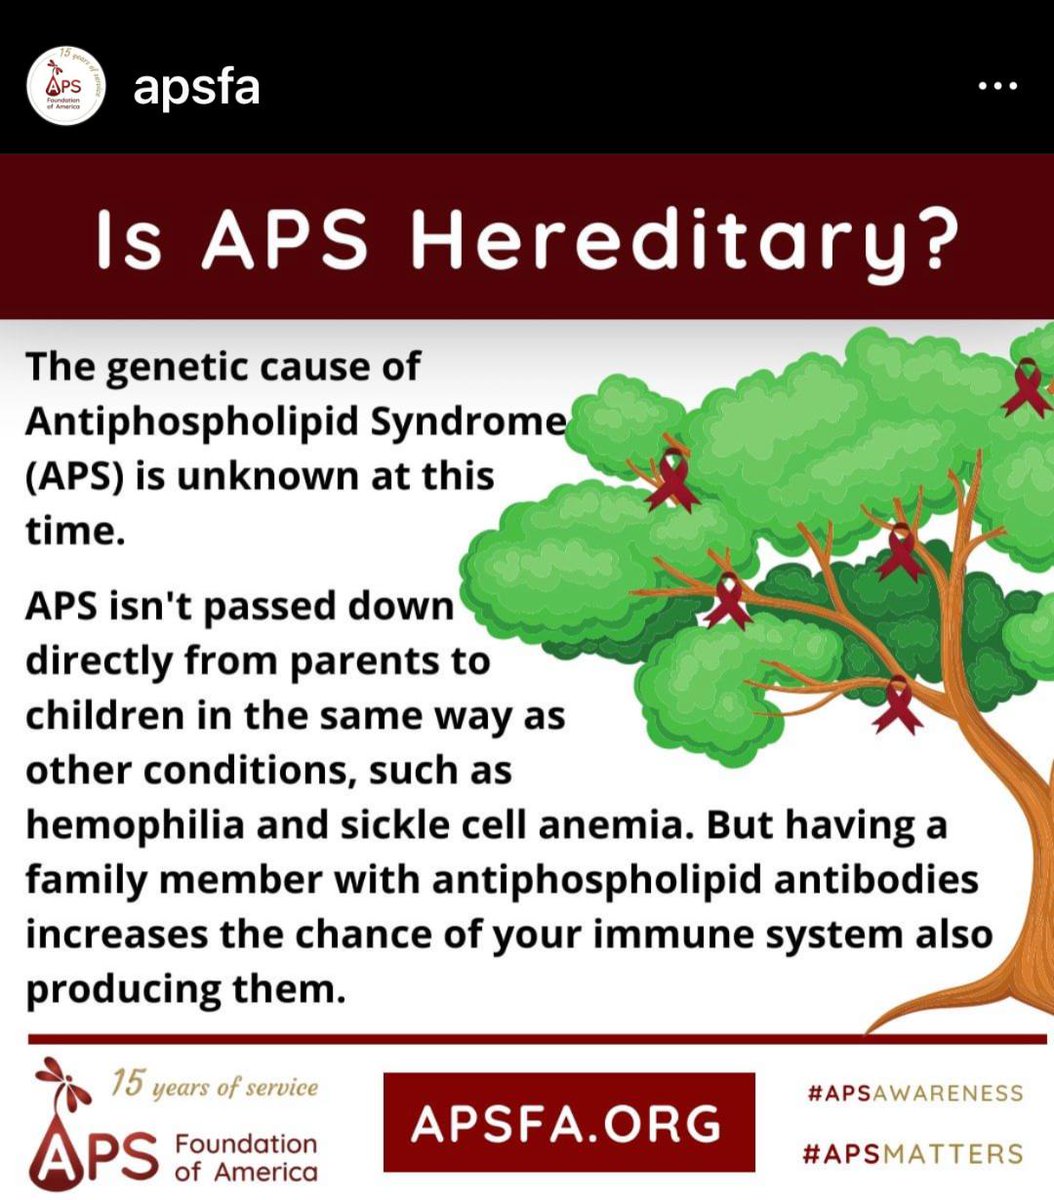 🎉June is Antiphospholipid Syndrome (APS) Awareness Month. @APSFA 
Learn More➡️apsfa.org
#APSMatters #APSAM23 #APSAwarenessMonth #YoungStroke
@apssupportuk @apsrugby @dvtprevention @thrombosisday @ThromboAdviser @ThrombosisRese1 @AutoimmuneAssoc @LupusResearch